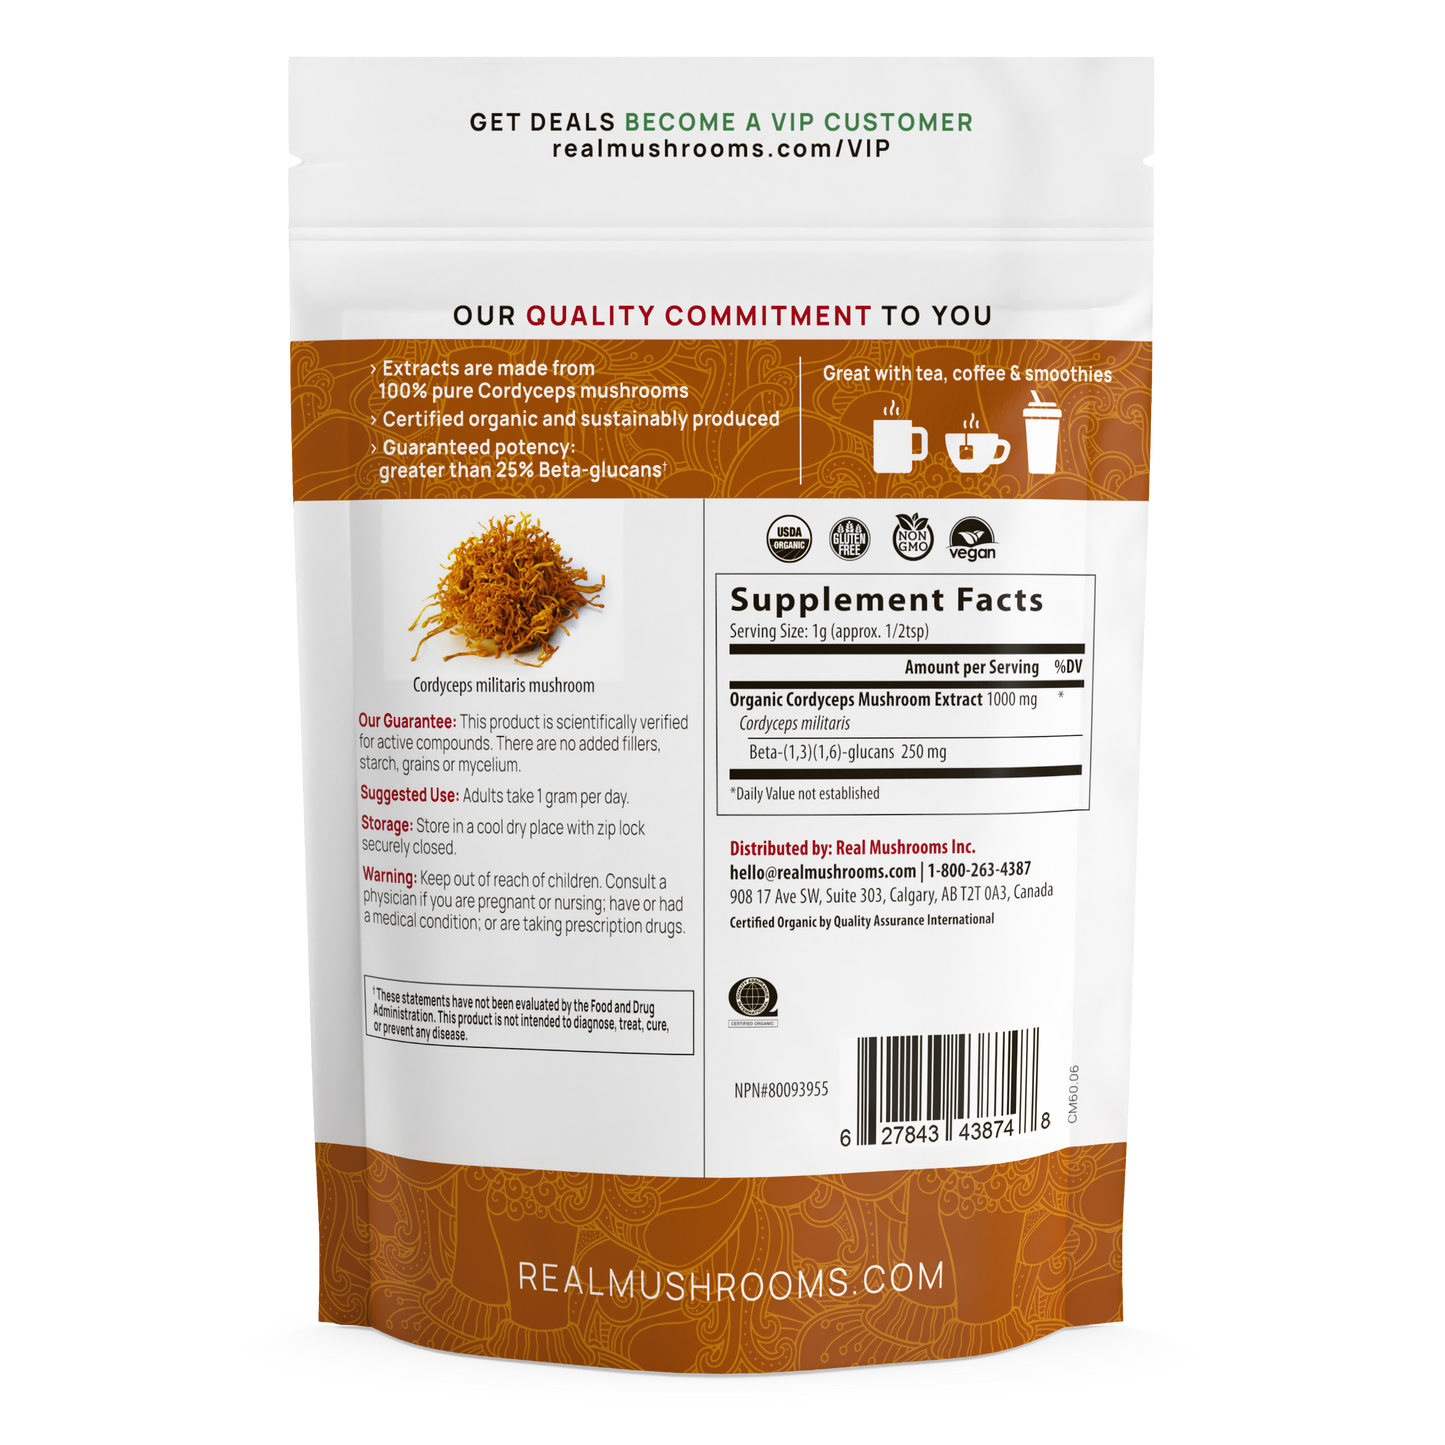 A bag of Organic Cordyceps Mushroom Extract Powder for Pets by Real Mushrooms on a black background.